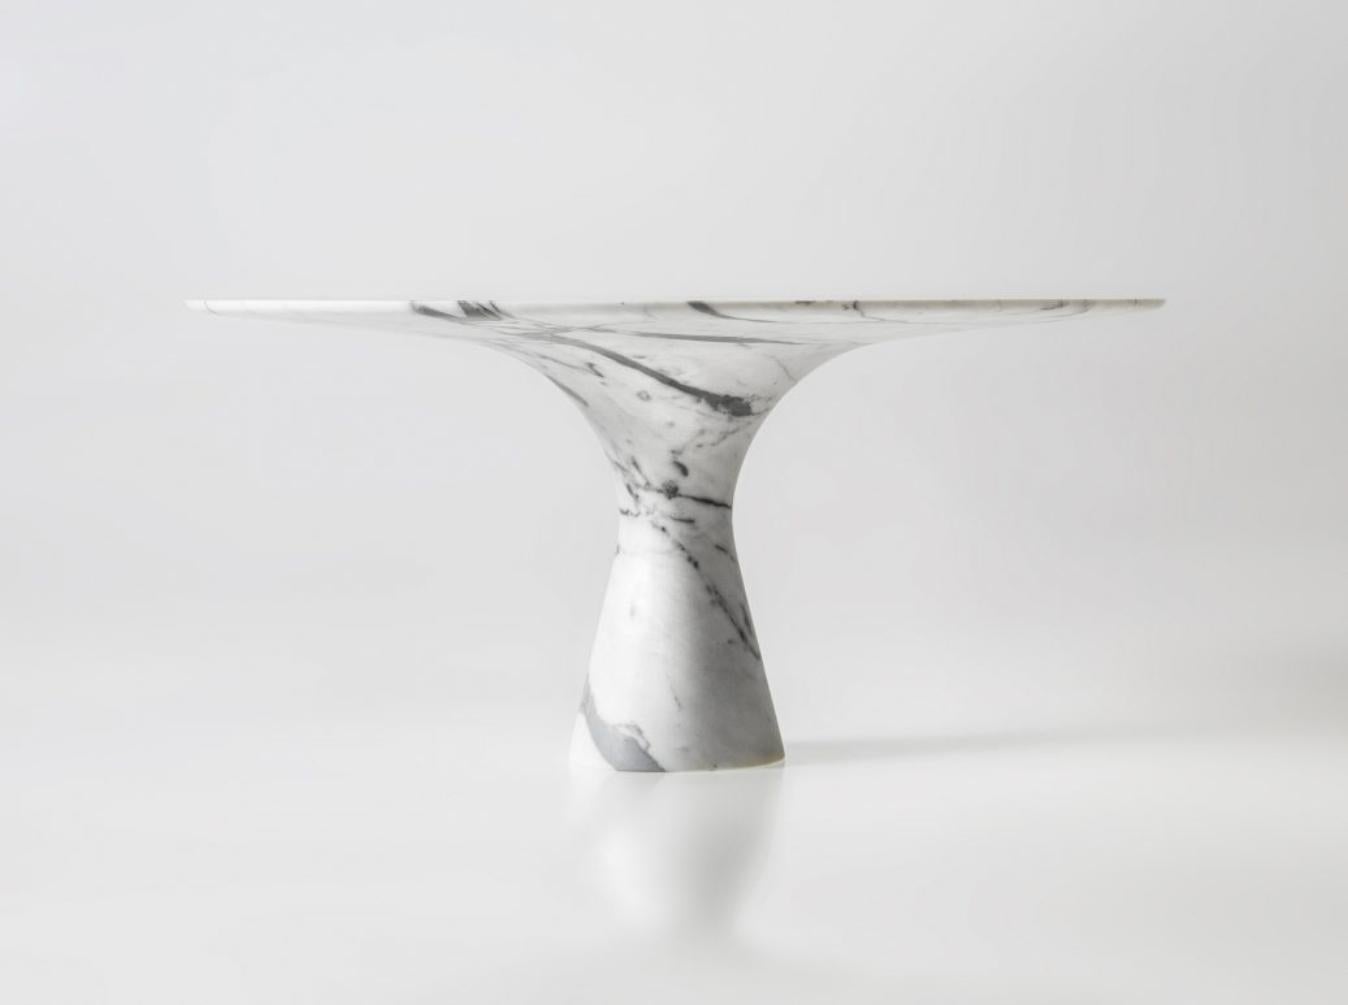 Bianco Statuarietto Refined Contemporary Marble Dining Table 180/75
Dimensions: 180 x 75 cm
Materials: Bianco Statuarietto
Angelo is the essence of a round table in natural stone, a sculptural shape in robust material with elegant lines and refined